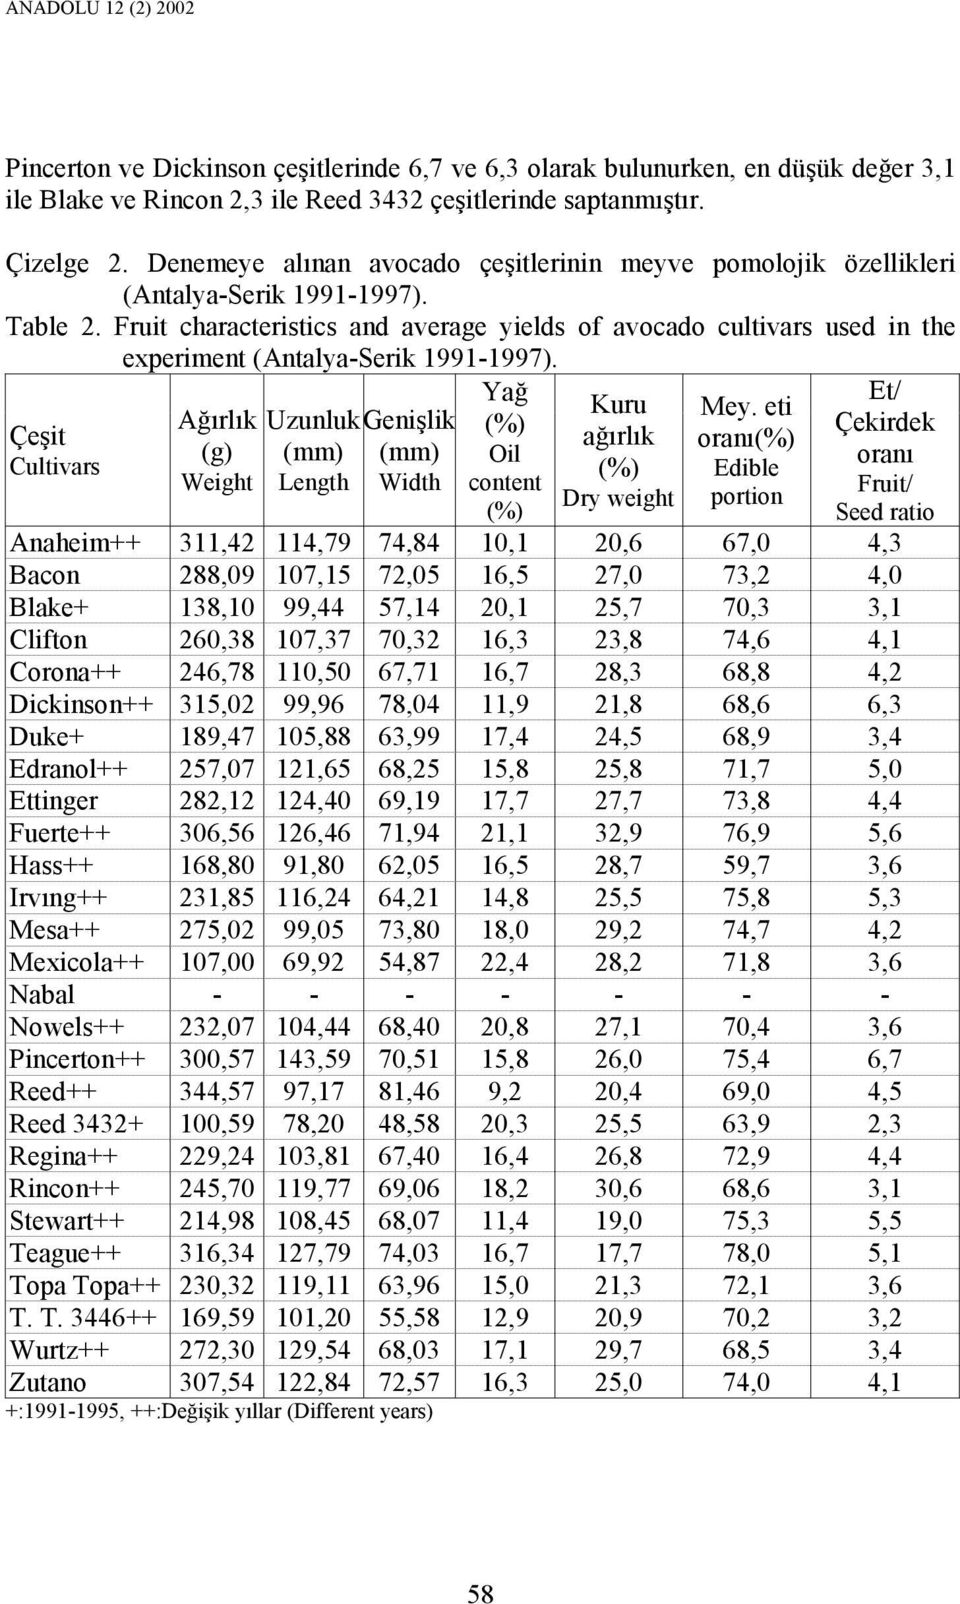 Fruit characteristics and average yields of avocado cultivars used in the experiment (Antalya-Serik 1991-1997).